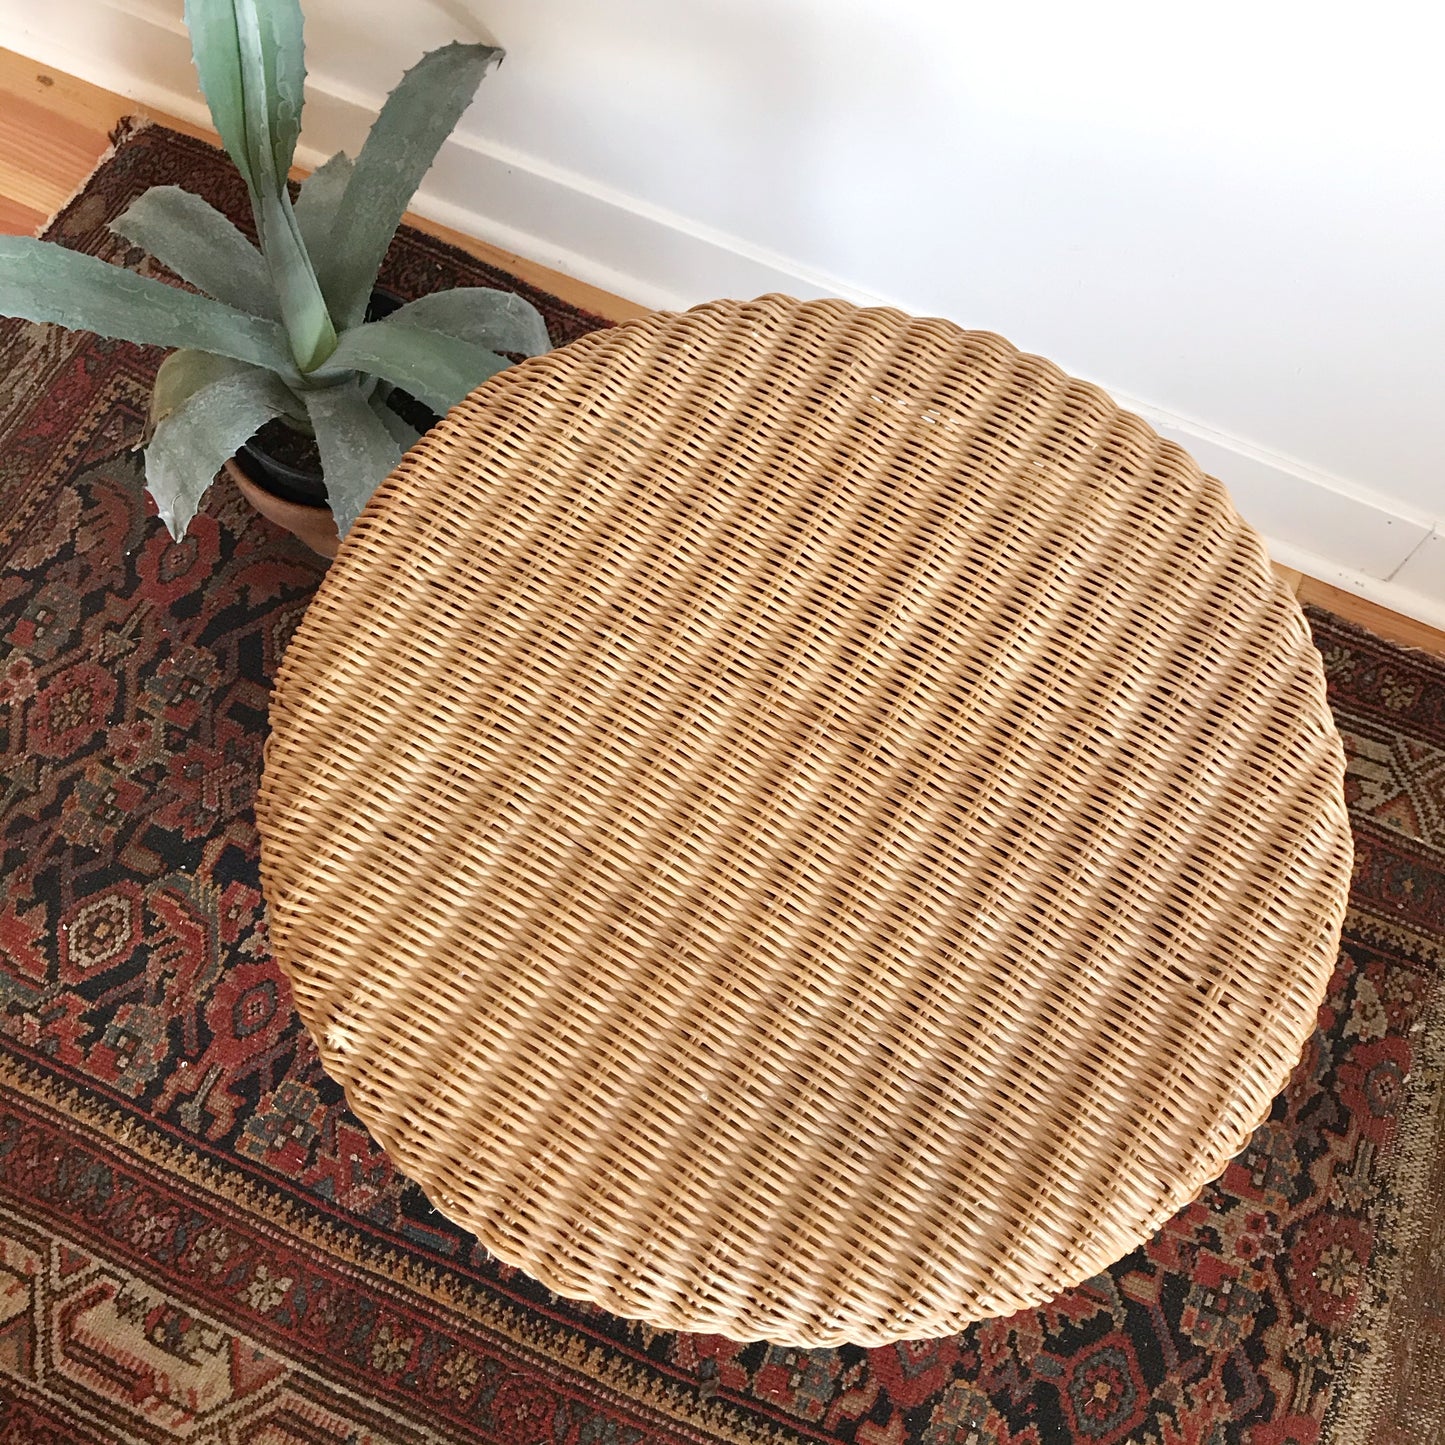 Vintage Round Wicker Side Table